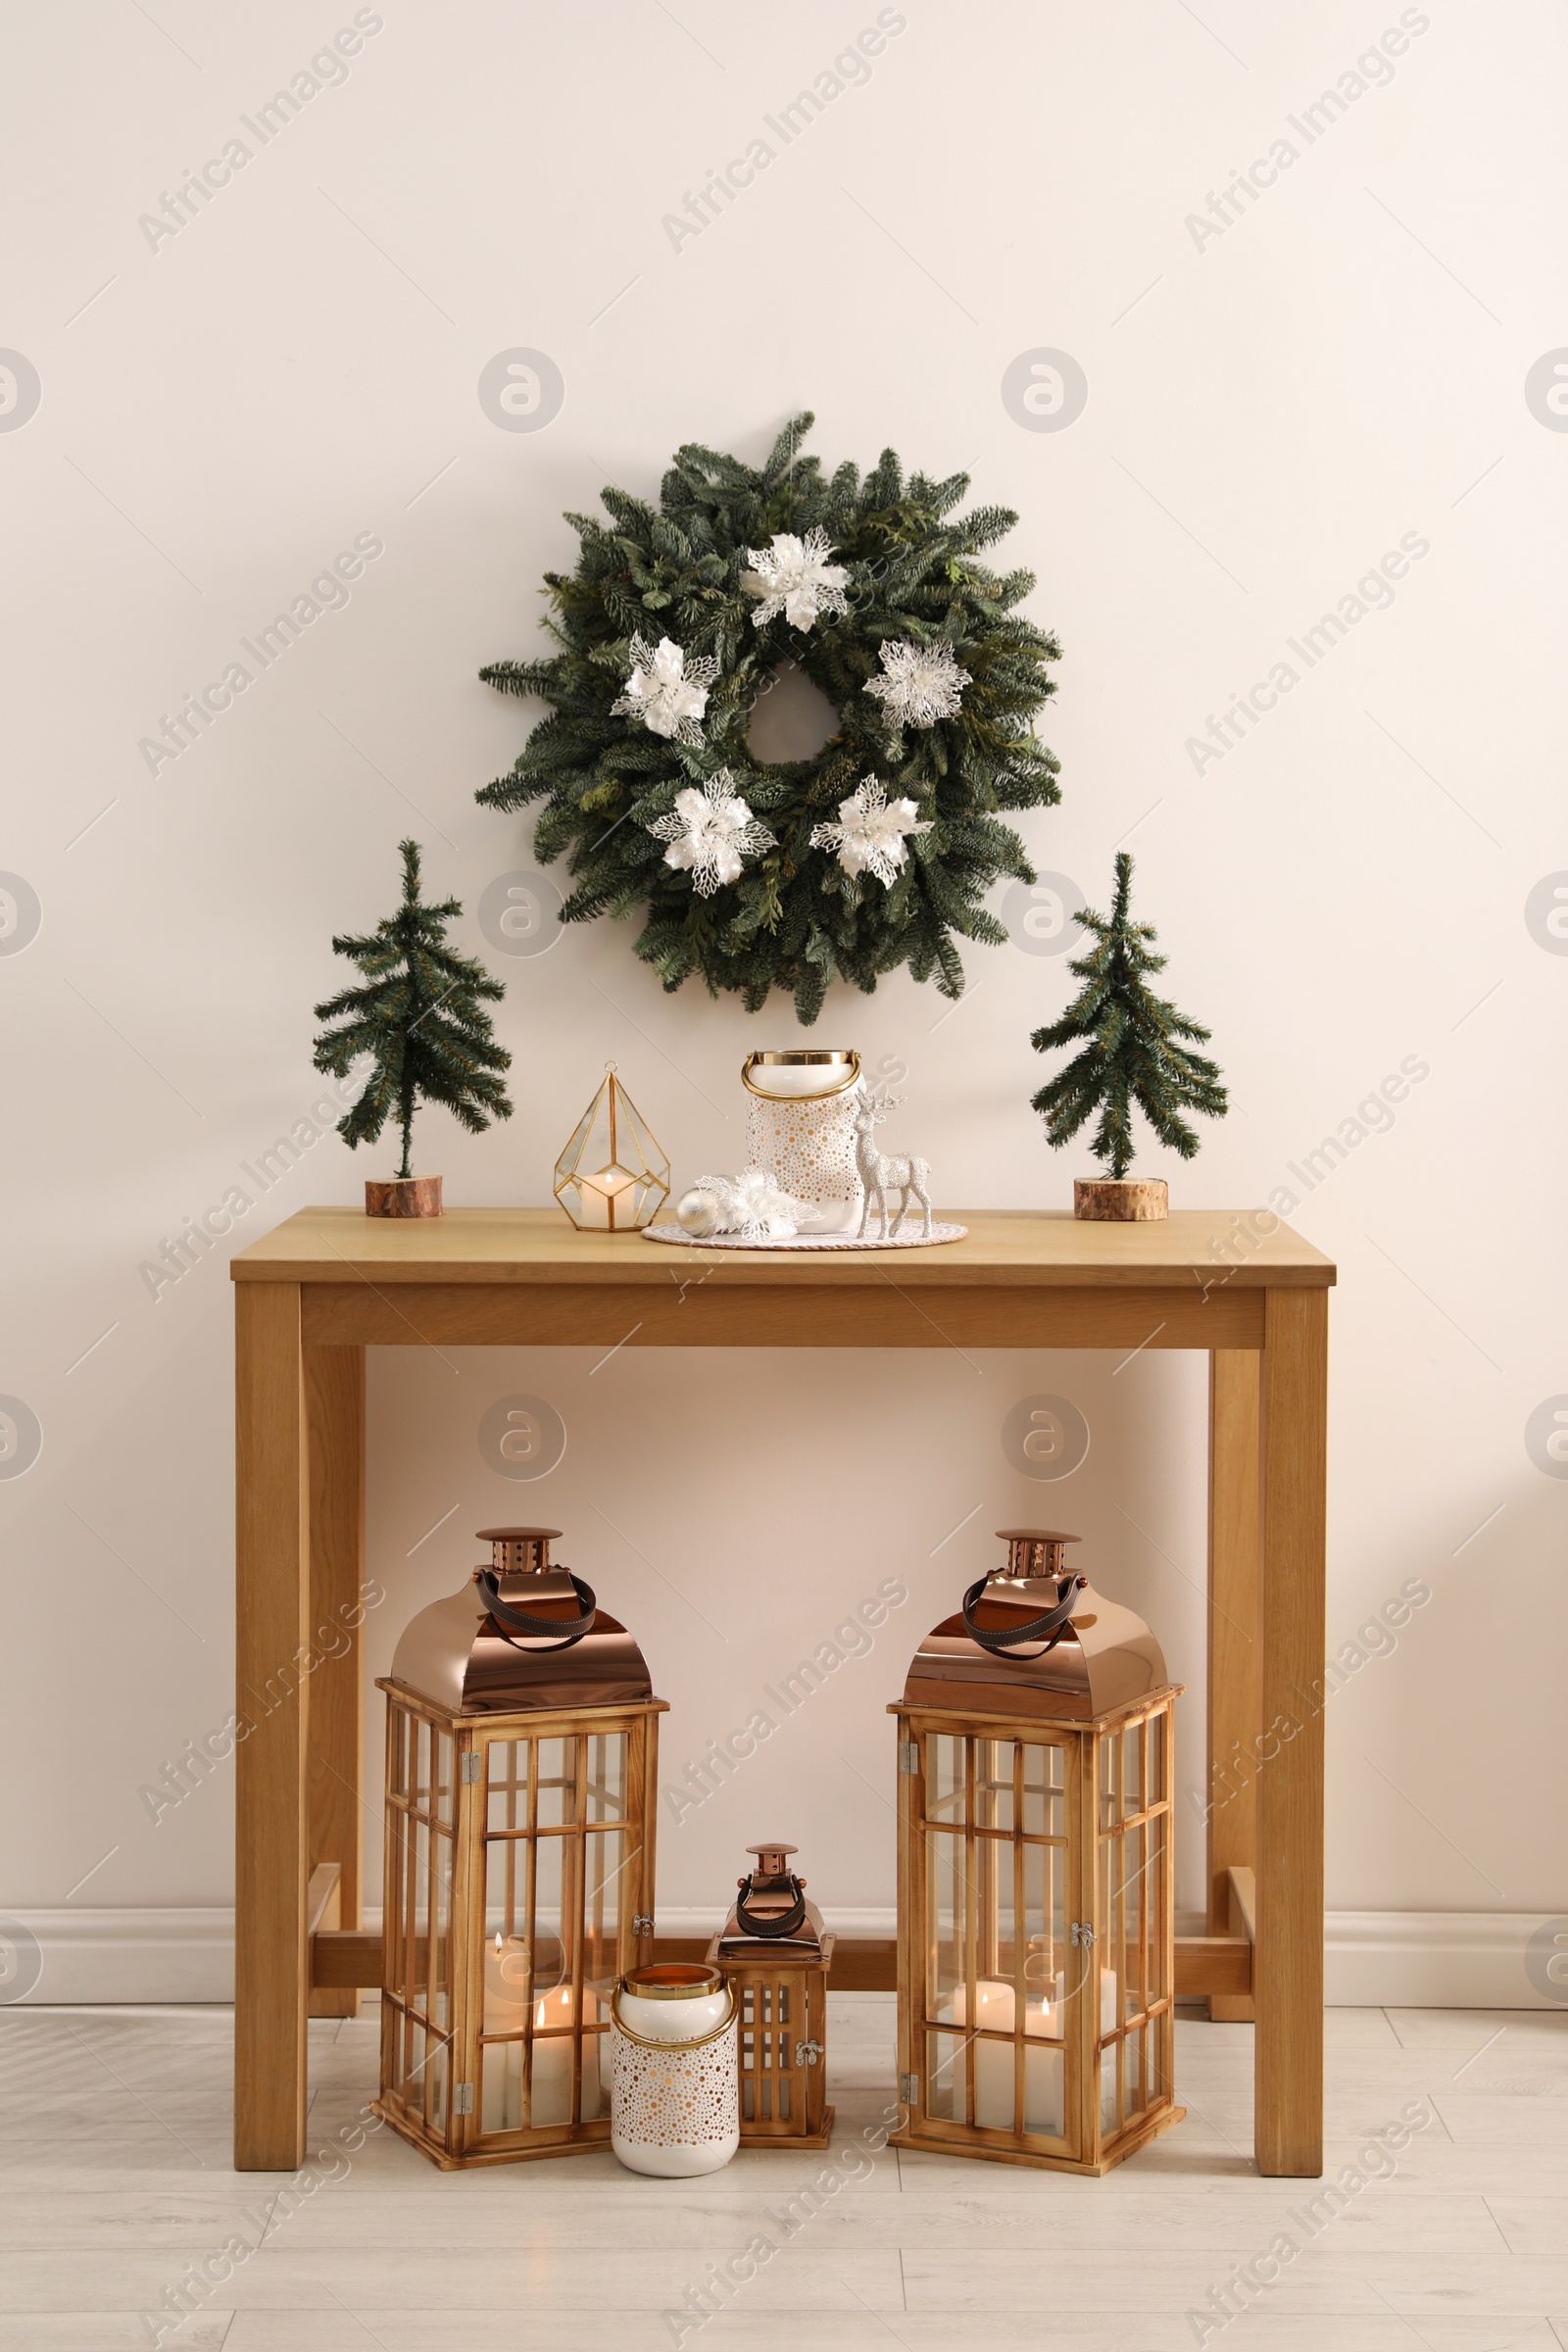 Photo of Table with Christmas decor in room. Interior design